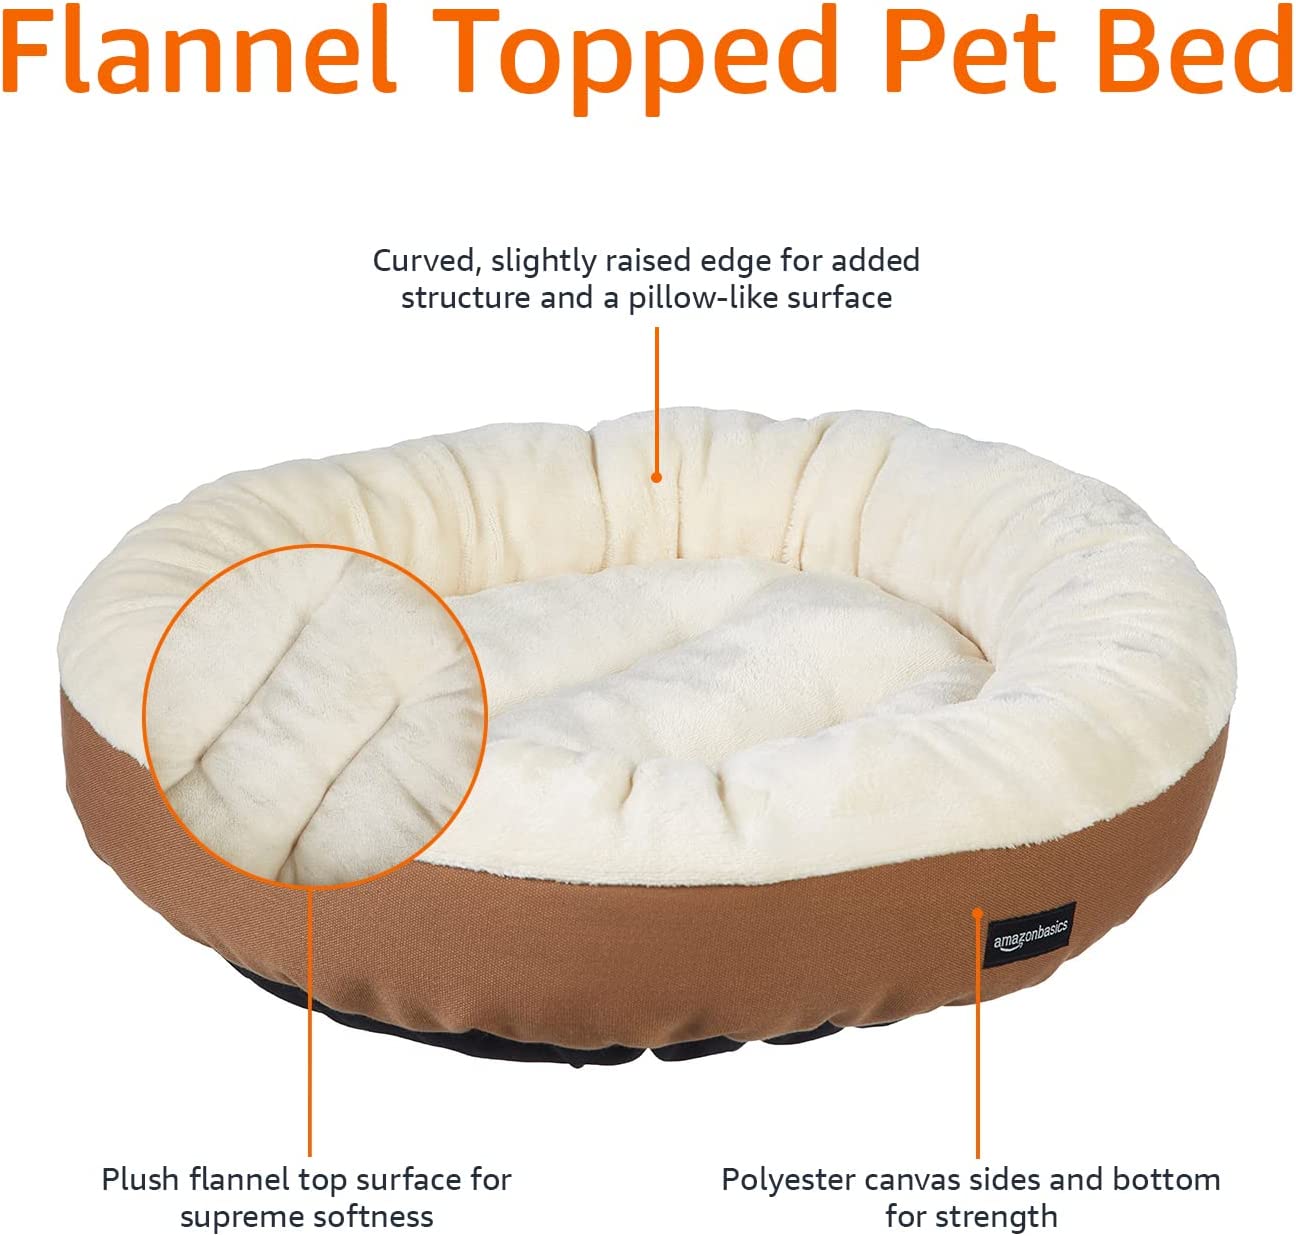 Round Bolster Dog with Flannel Top Dog Bed